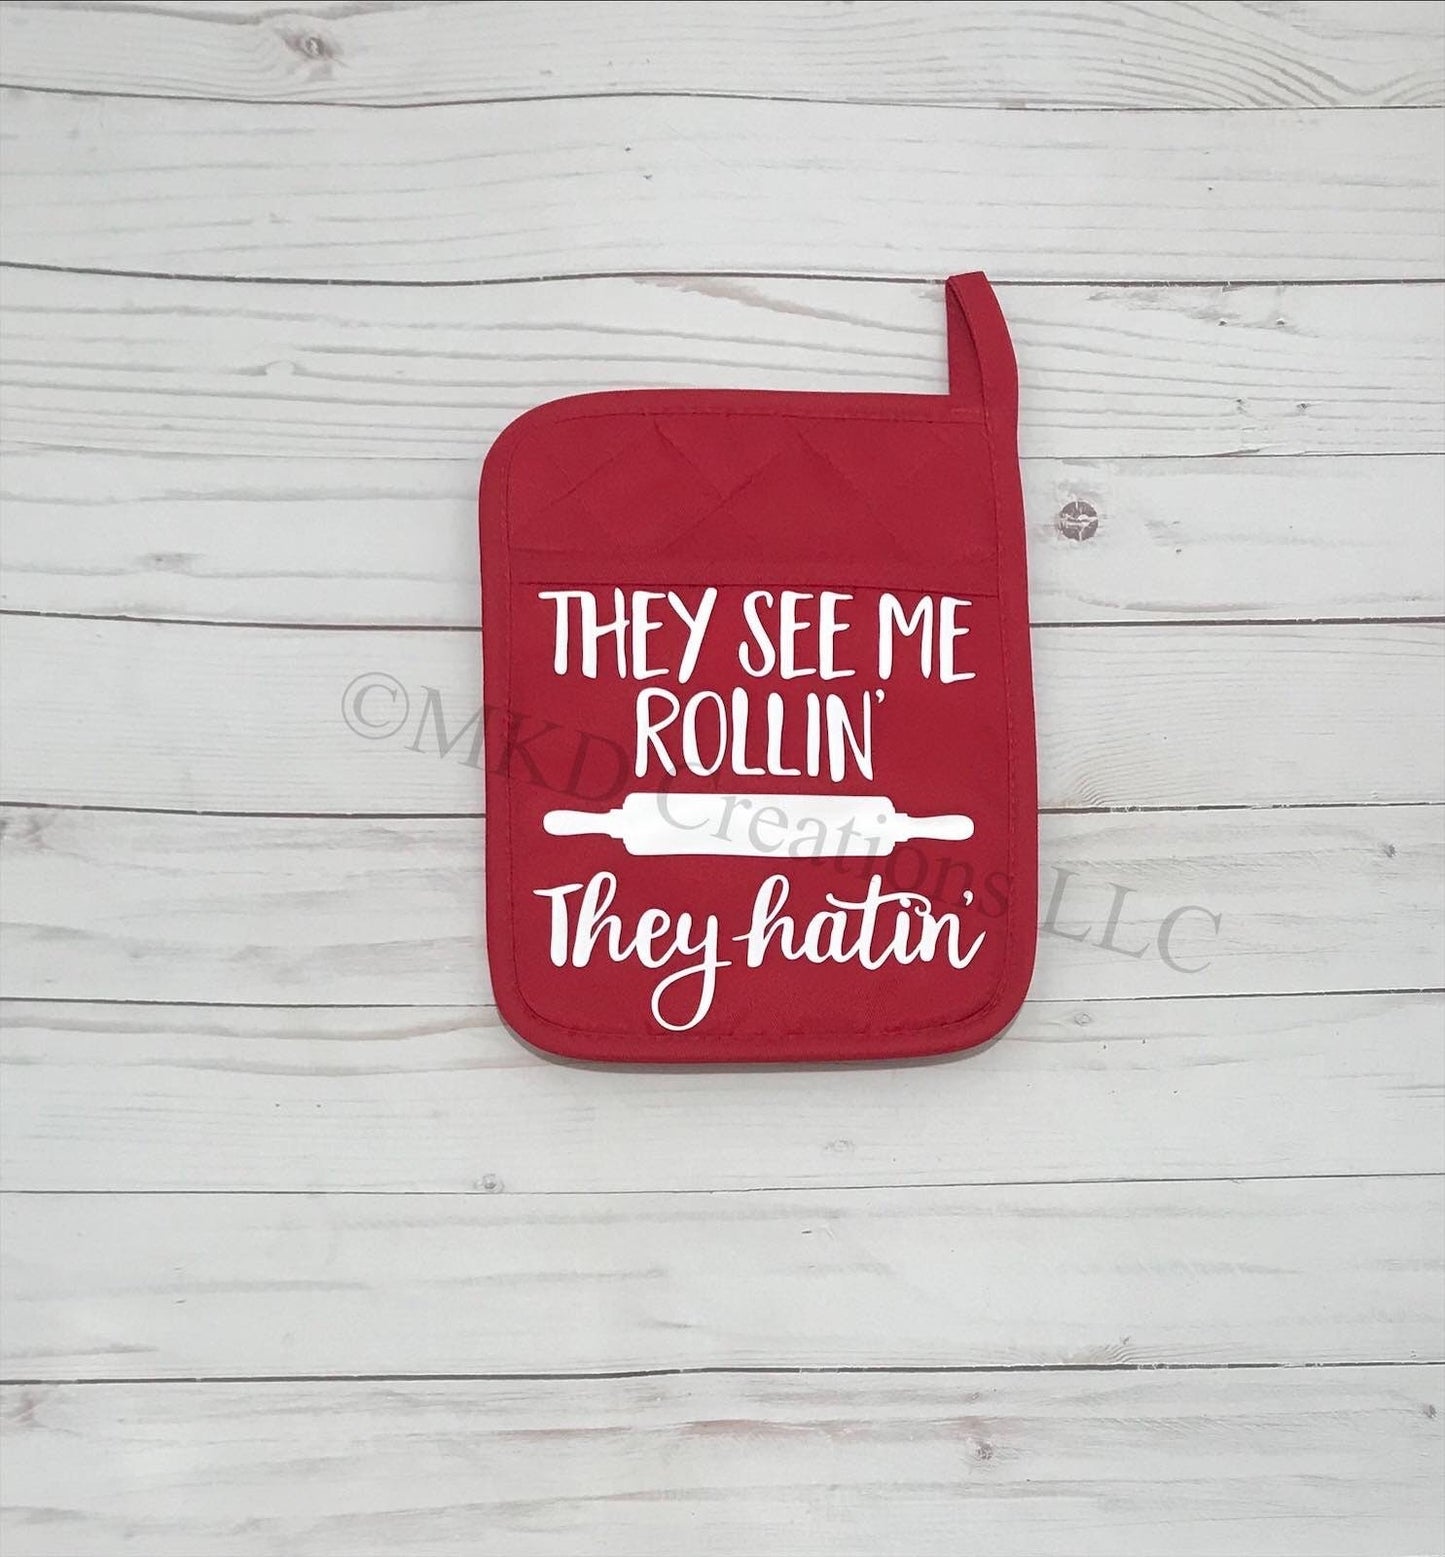 Pot Holders only " They see me rollin’ they hatin’" | Pot holder colors available Black | Teal | Red | Gray |